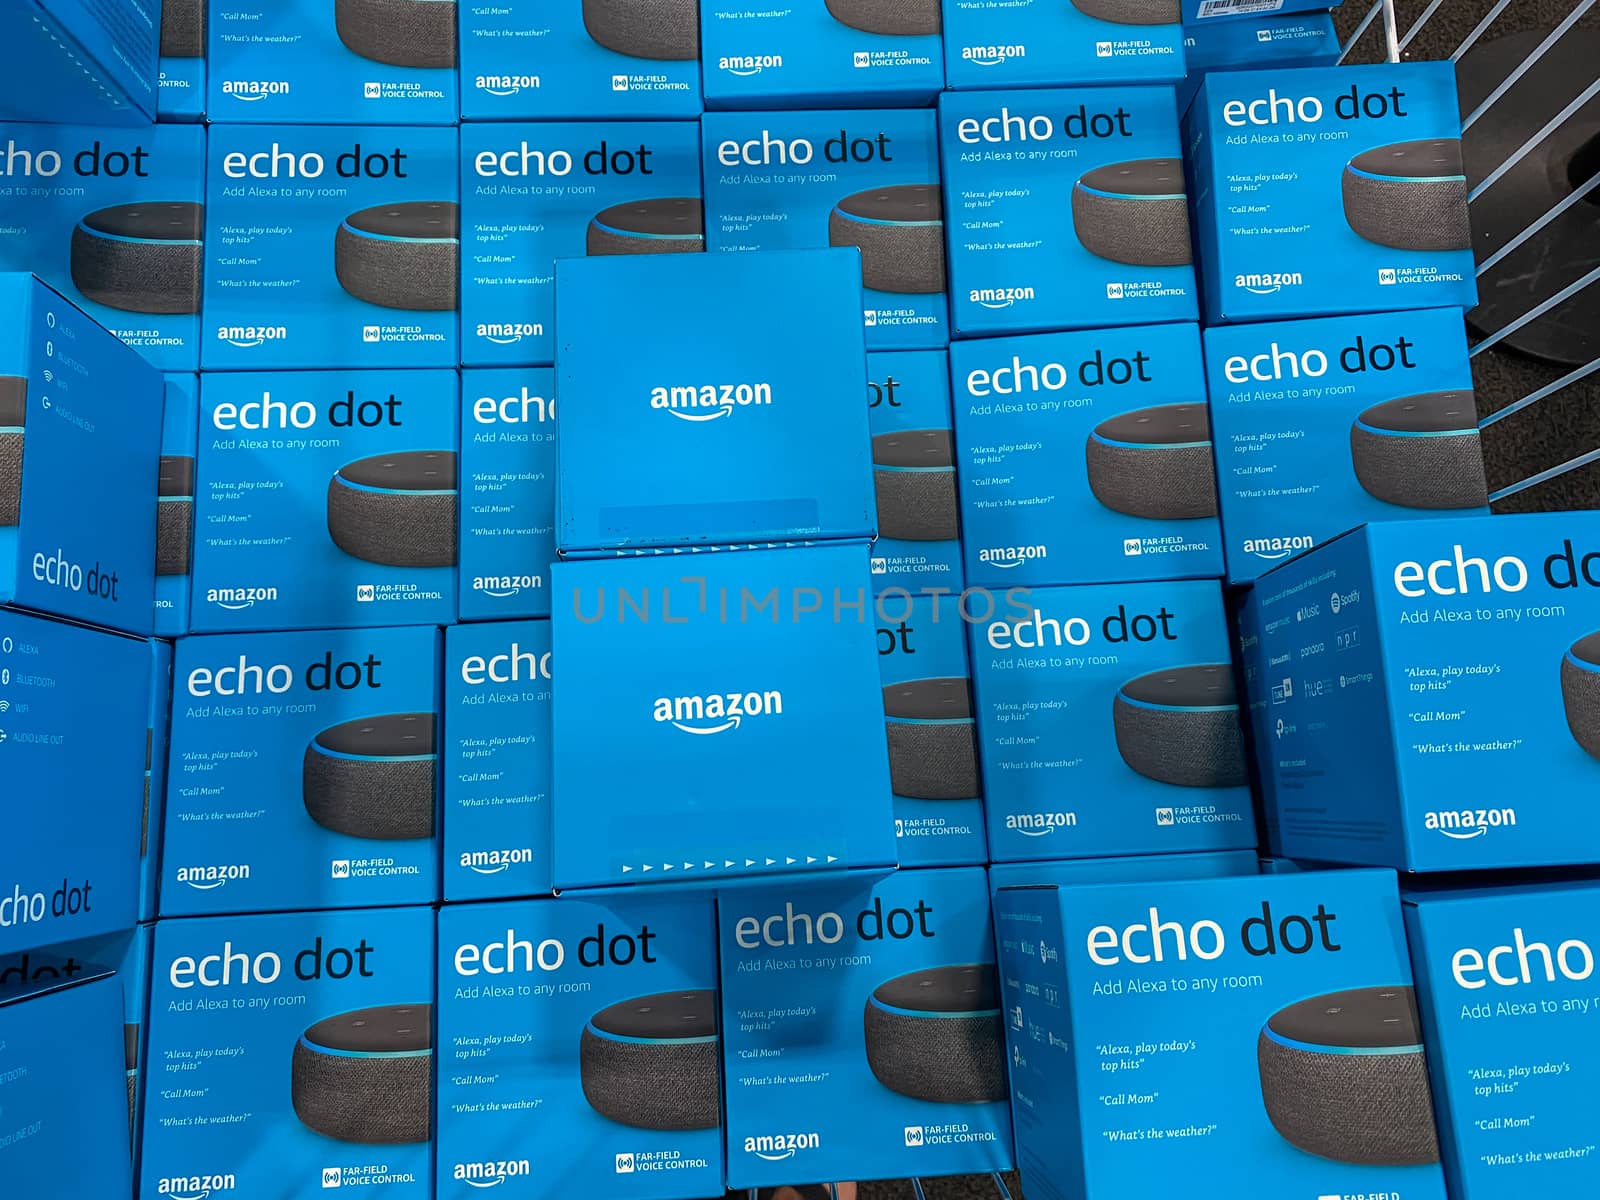 Boxes of Amazon Echo Dot virtural assistants for sale in a displ by Jshanebutt